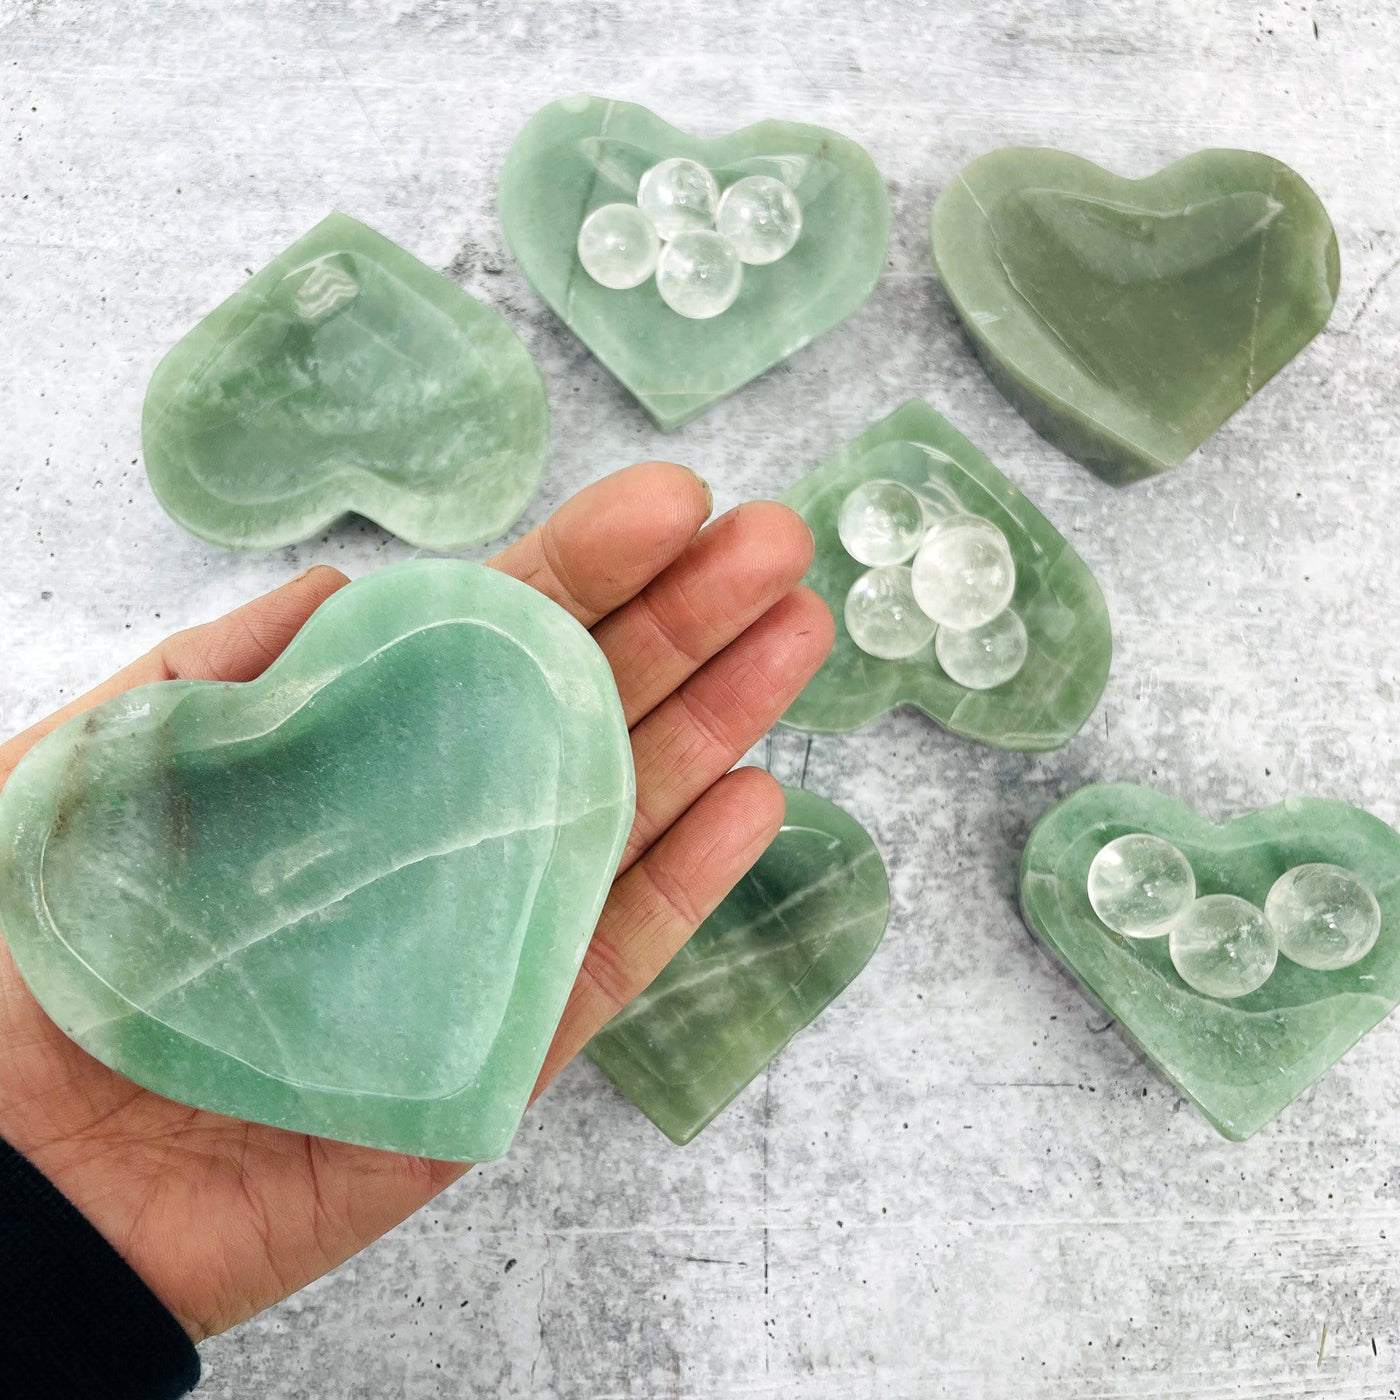 Polished Green Aventurine Stone Heart Dish in hand for size reference